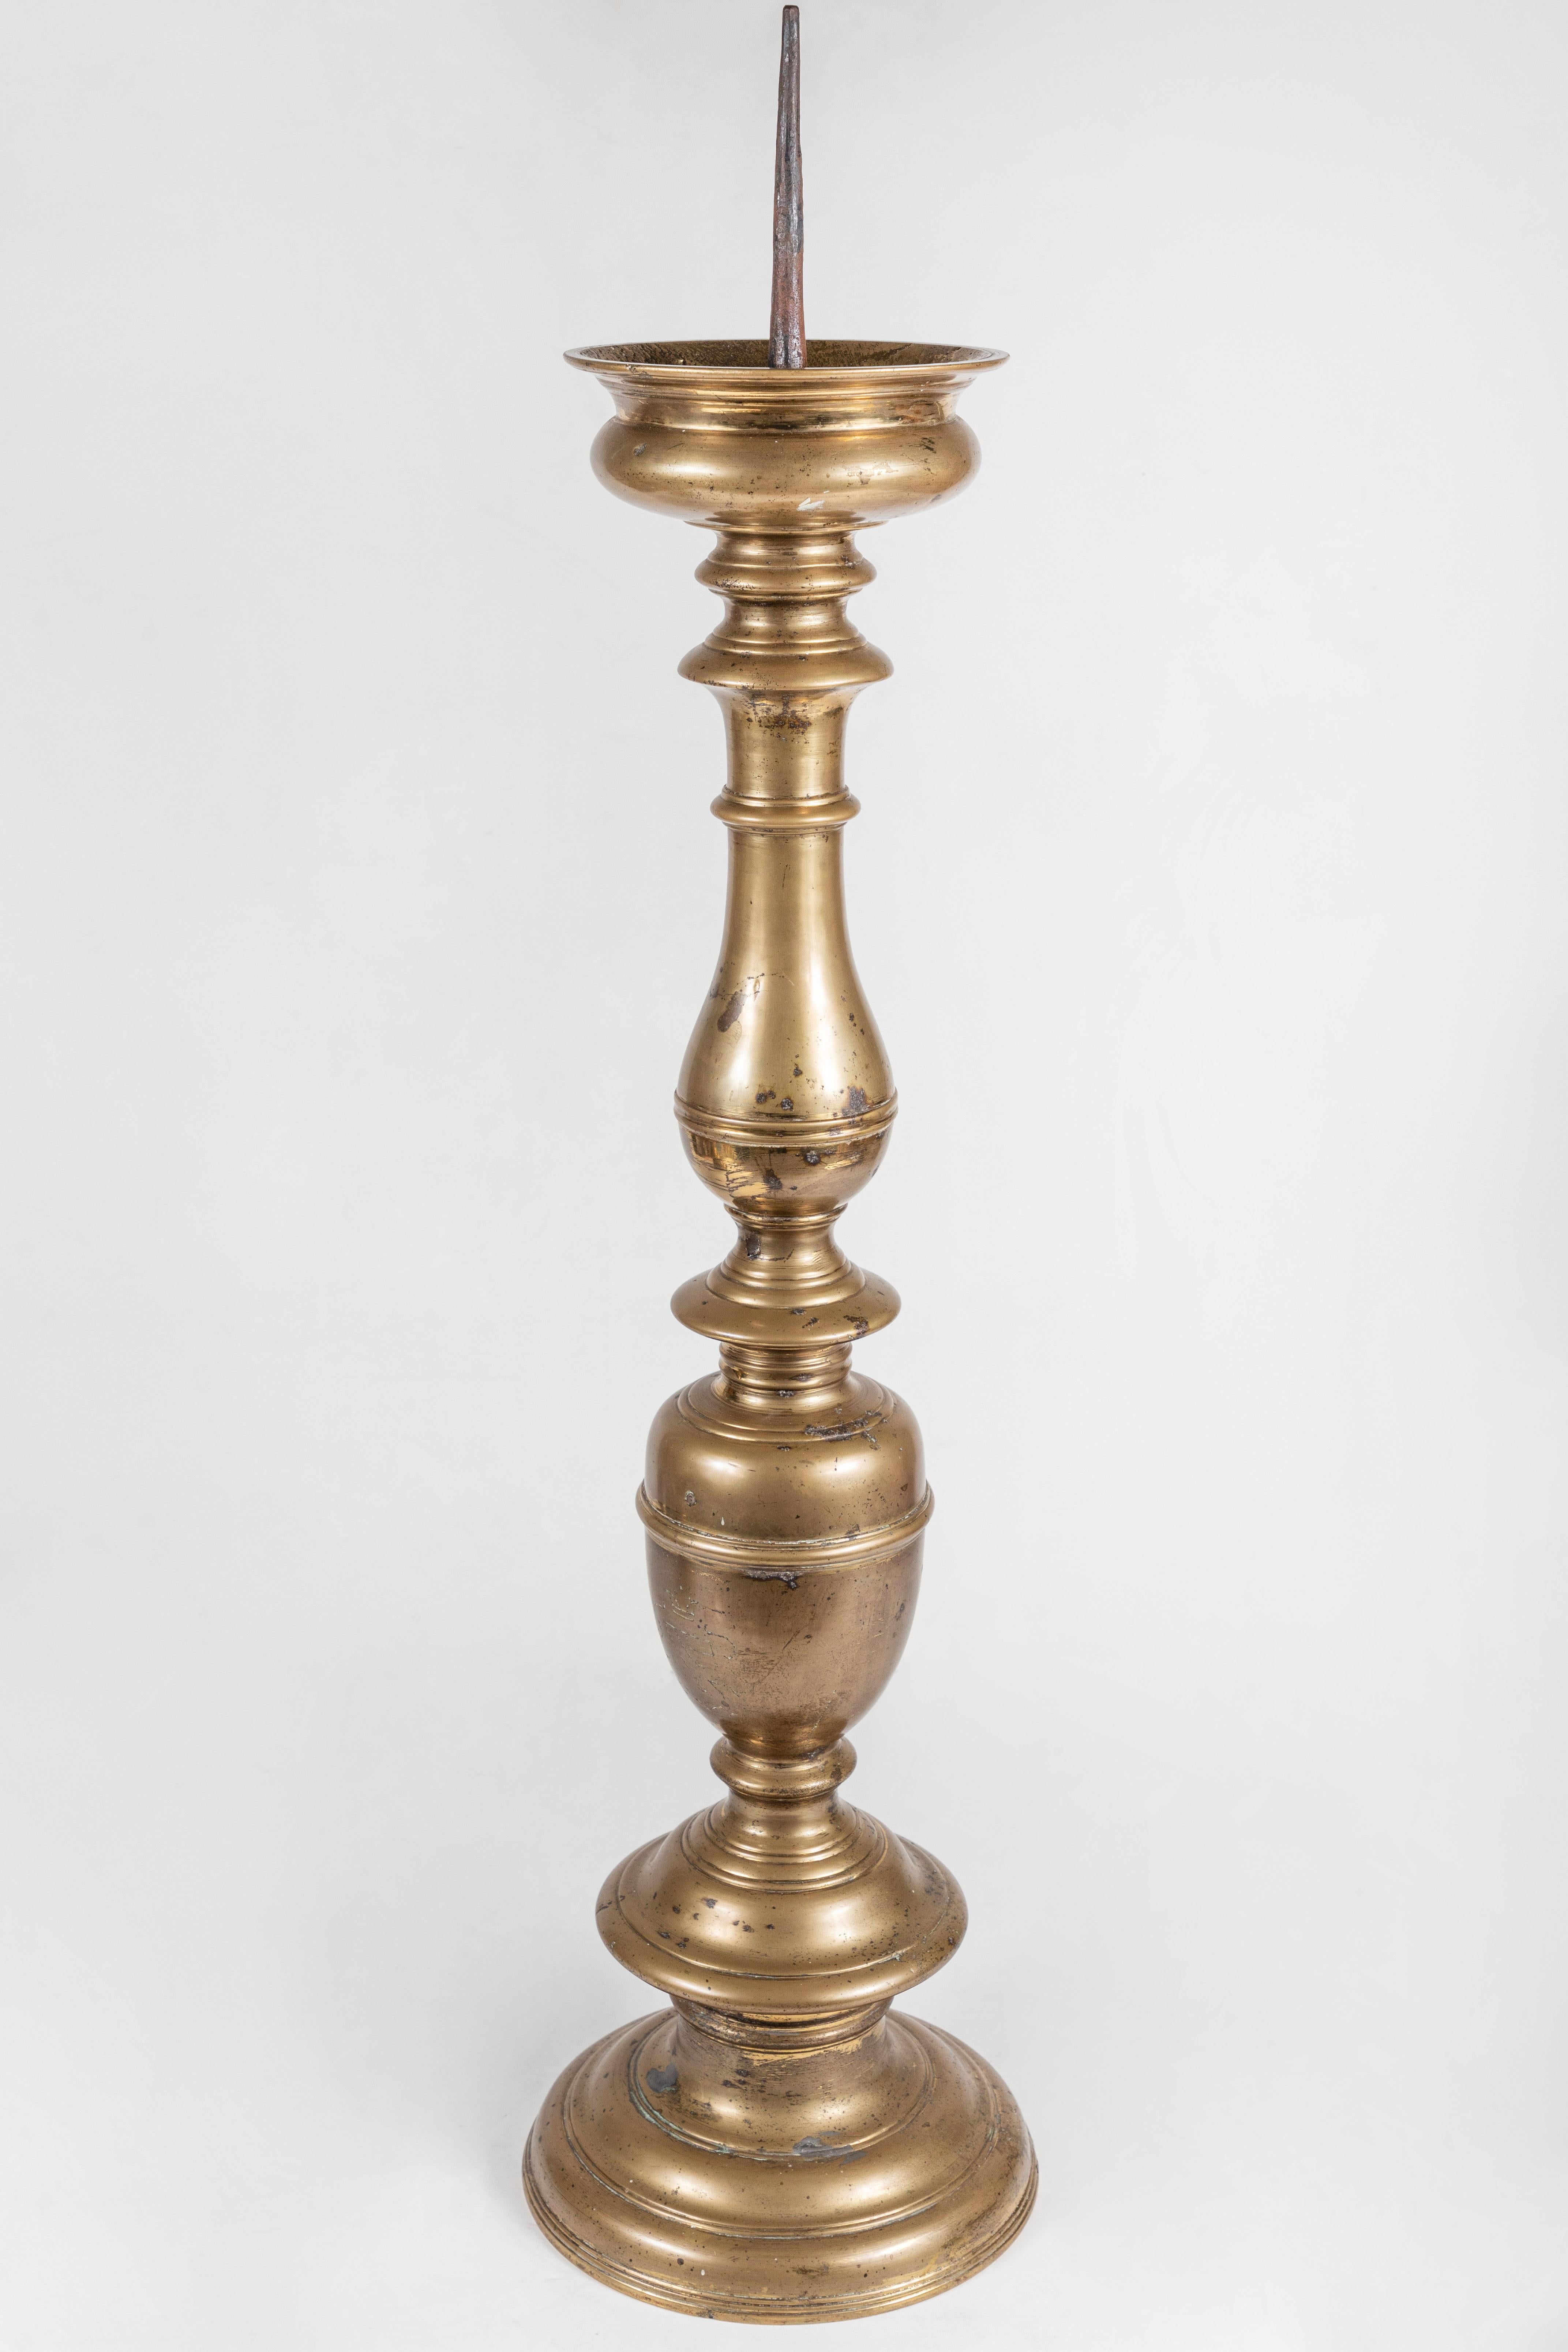 An absolutely grand pair of solid brass, turned, tiered candlesticks from Holland. One is engraved with a large, royal crest.